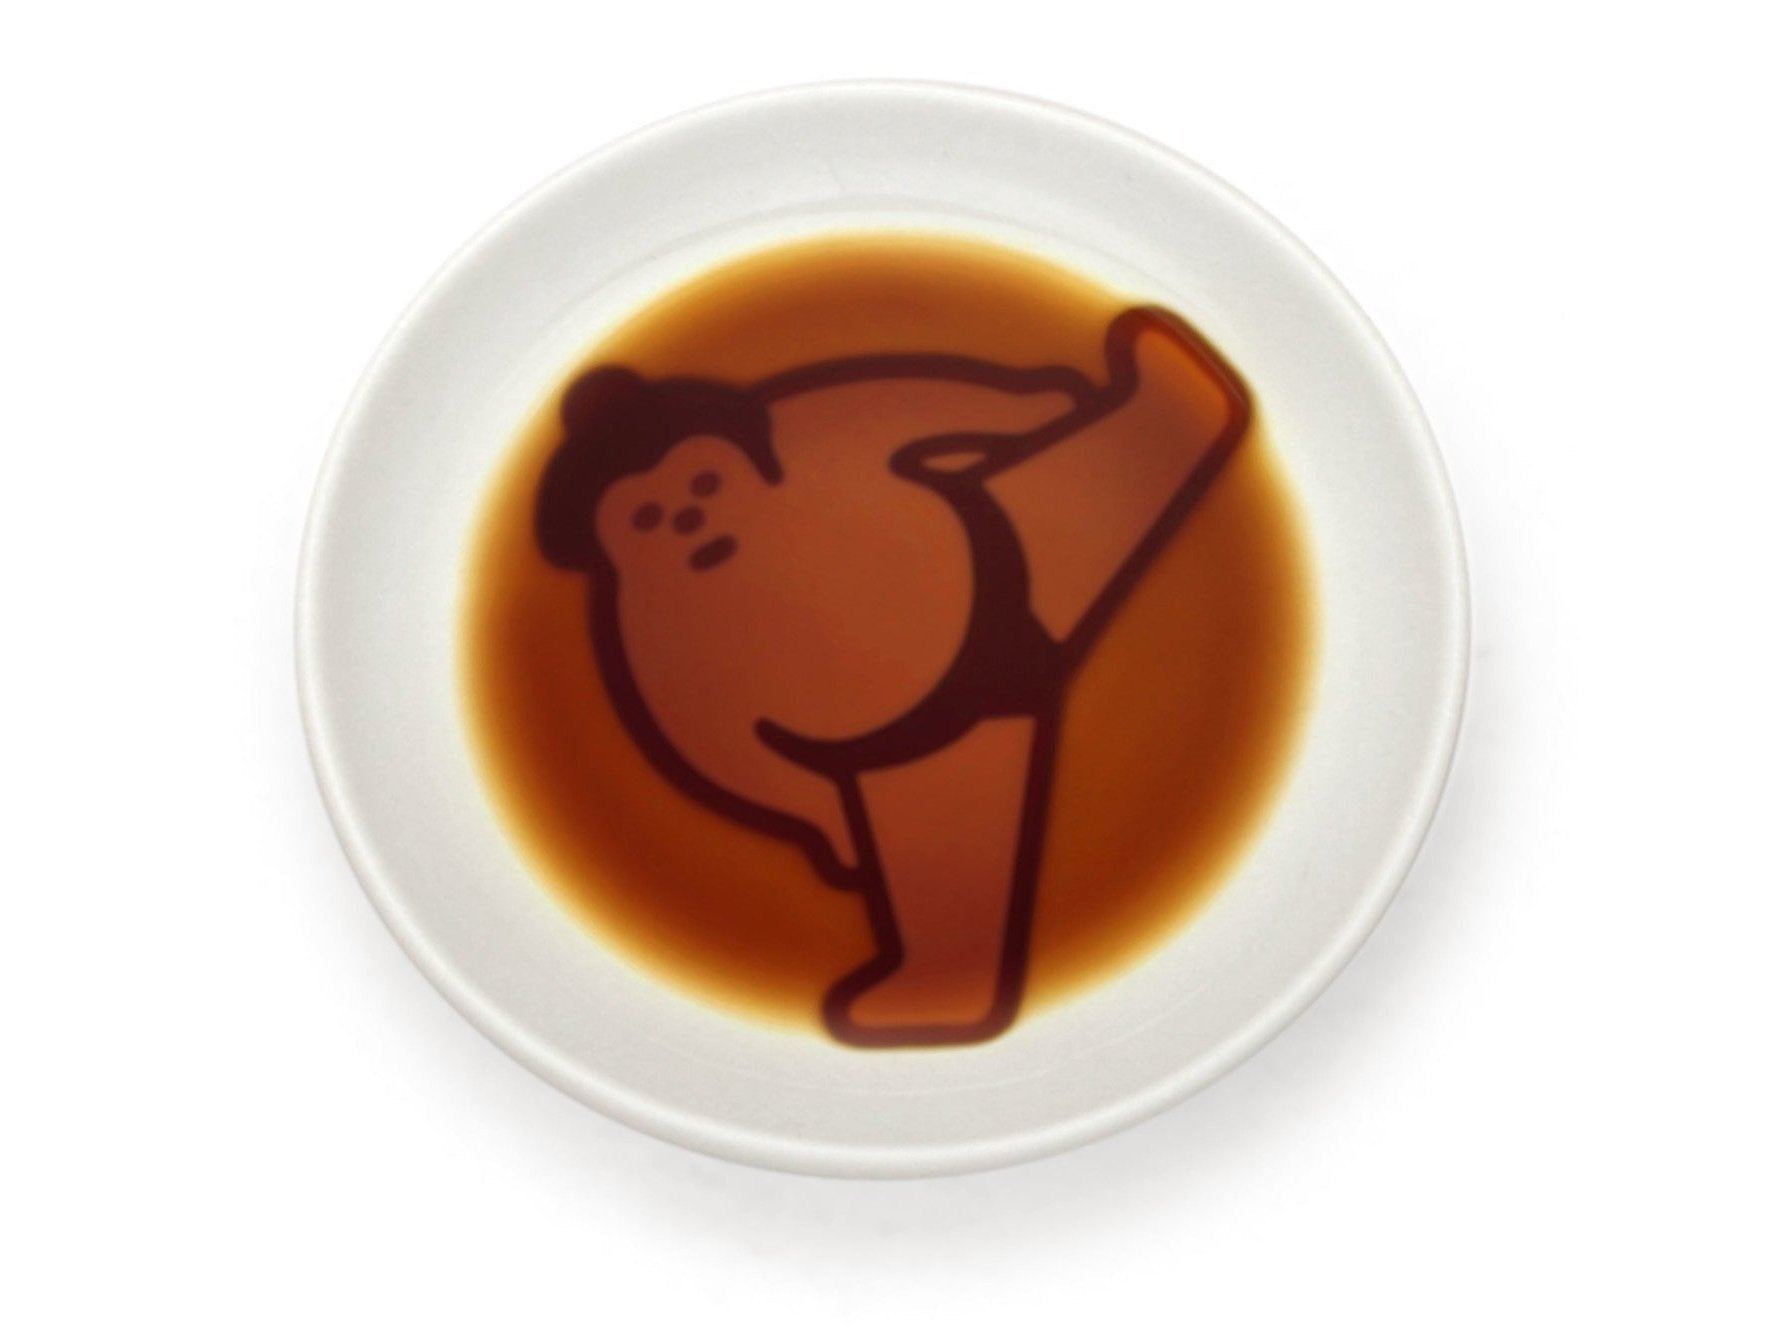 Aruta Sumo Soy Sauce Plate